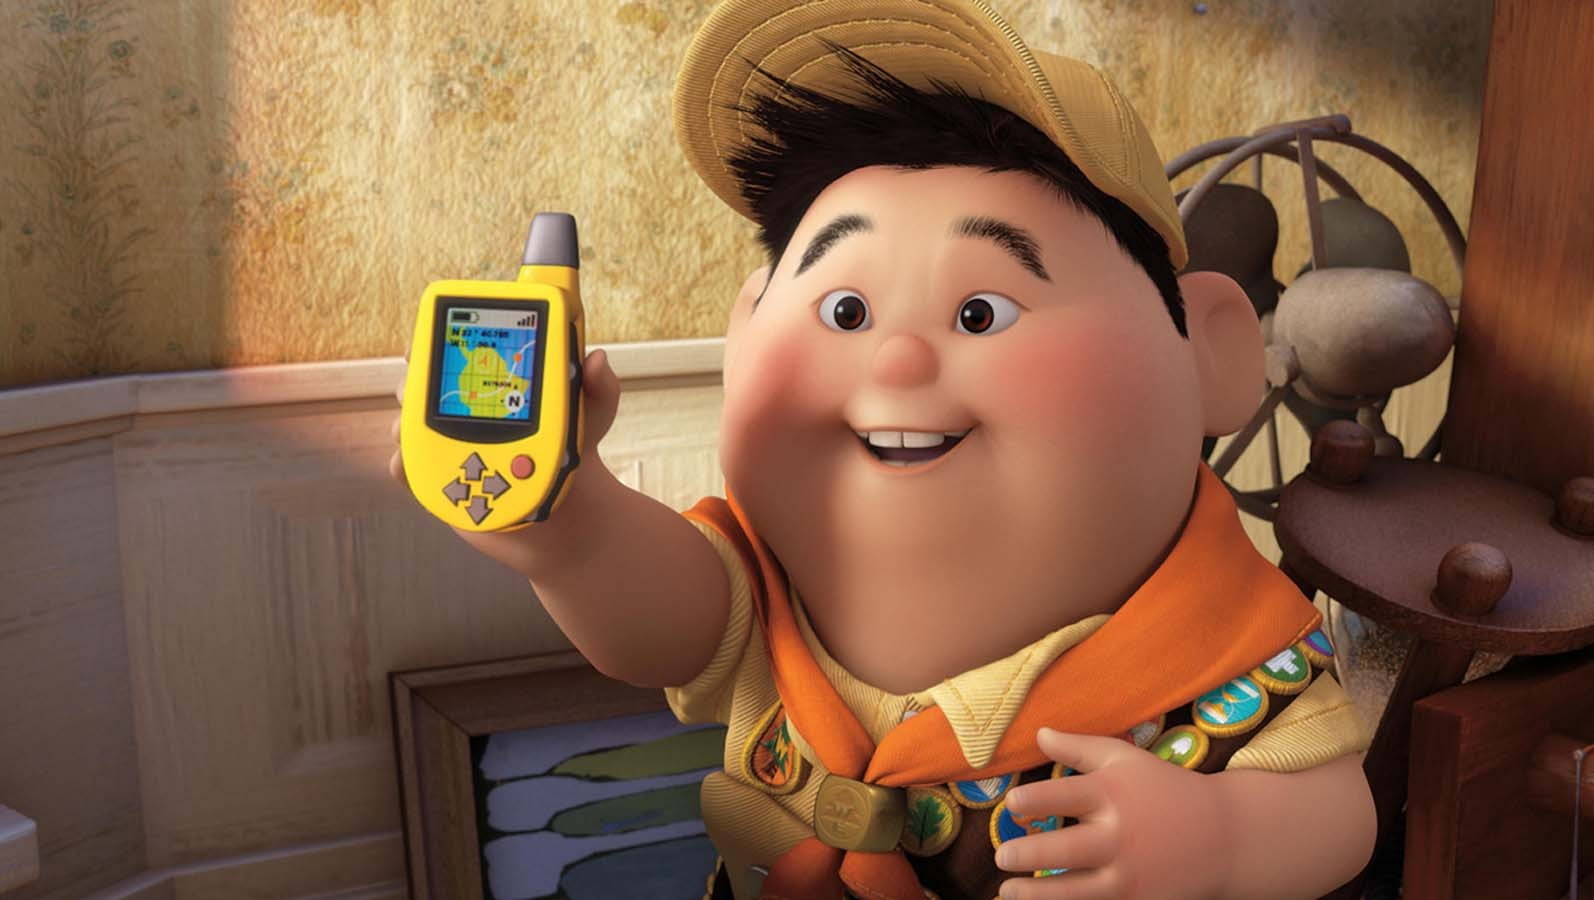 Russel of Up movie, Up (movie), movies, scouts, smiling, childhood